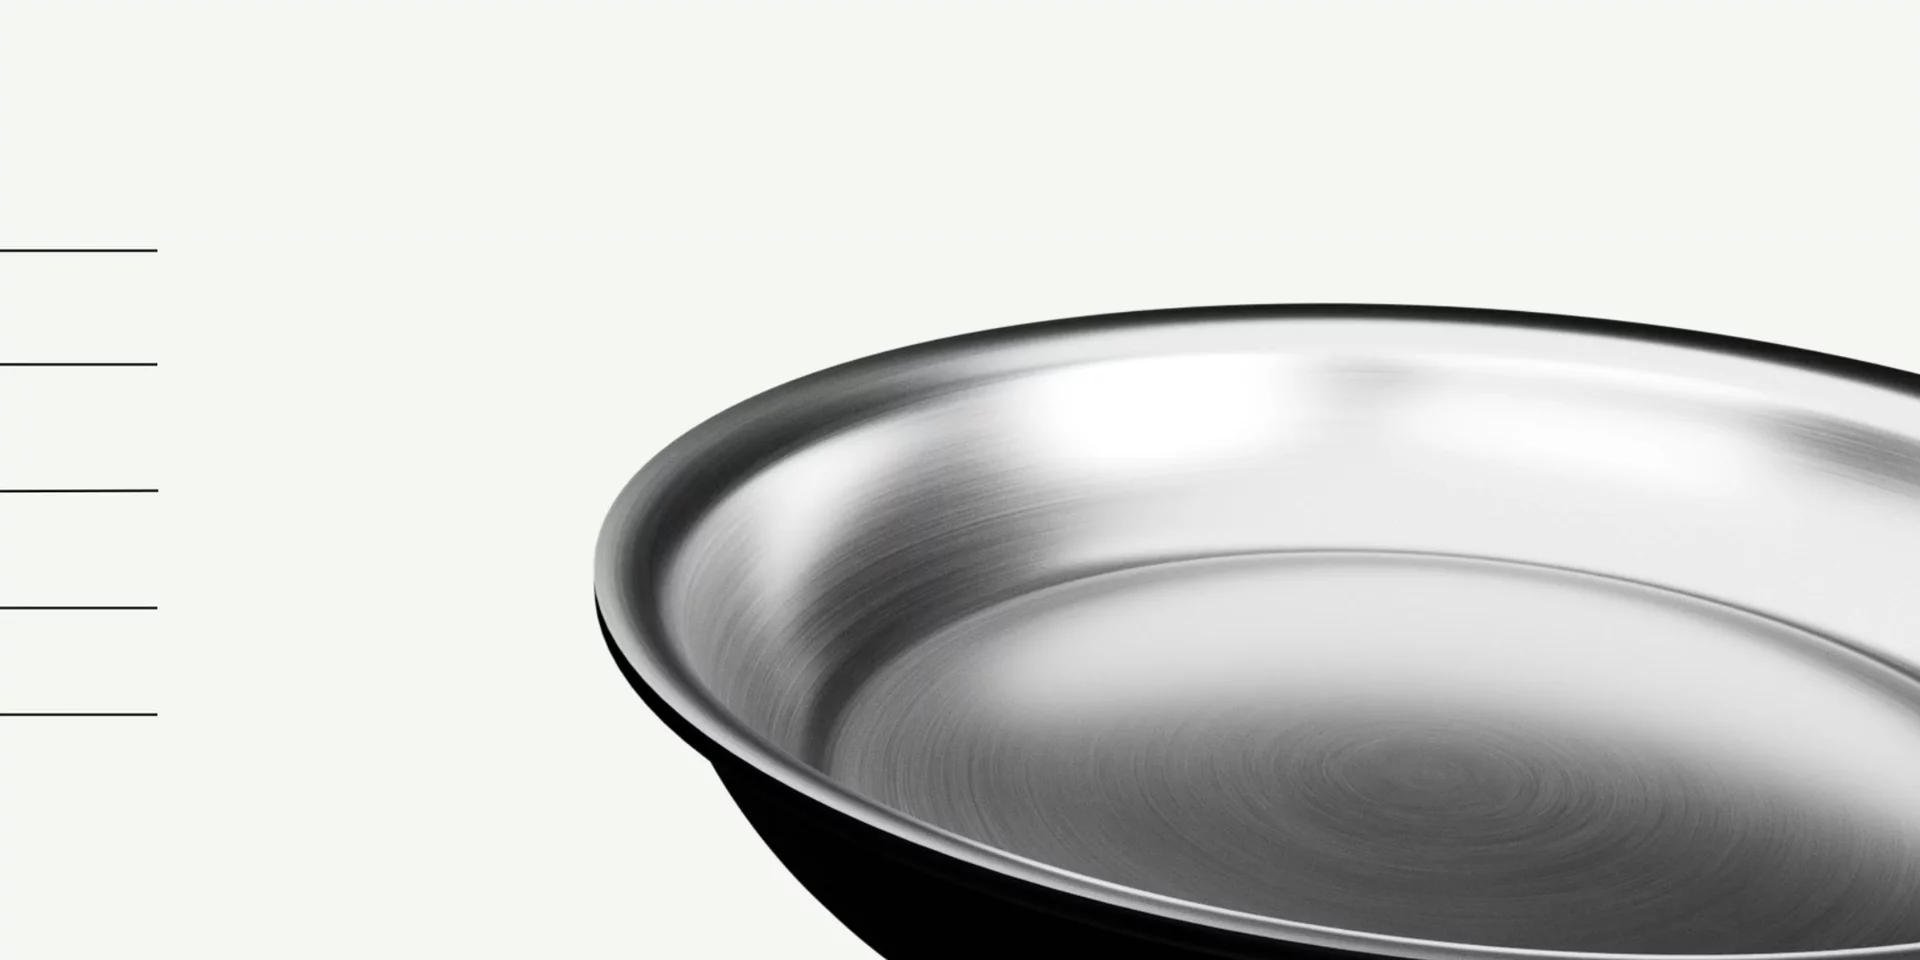 Millvado Sauce Pan, Stainless Steel 2.4 Quart Sauce Pan with Clear Glass Lid and Permanent Measurement Markings, Small Boiling Pot, Induction, GAS